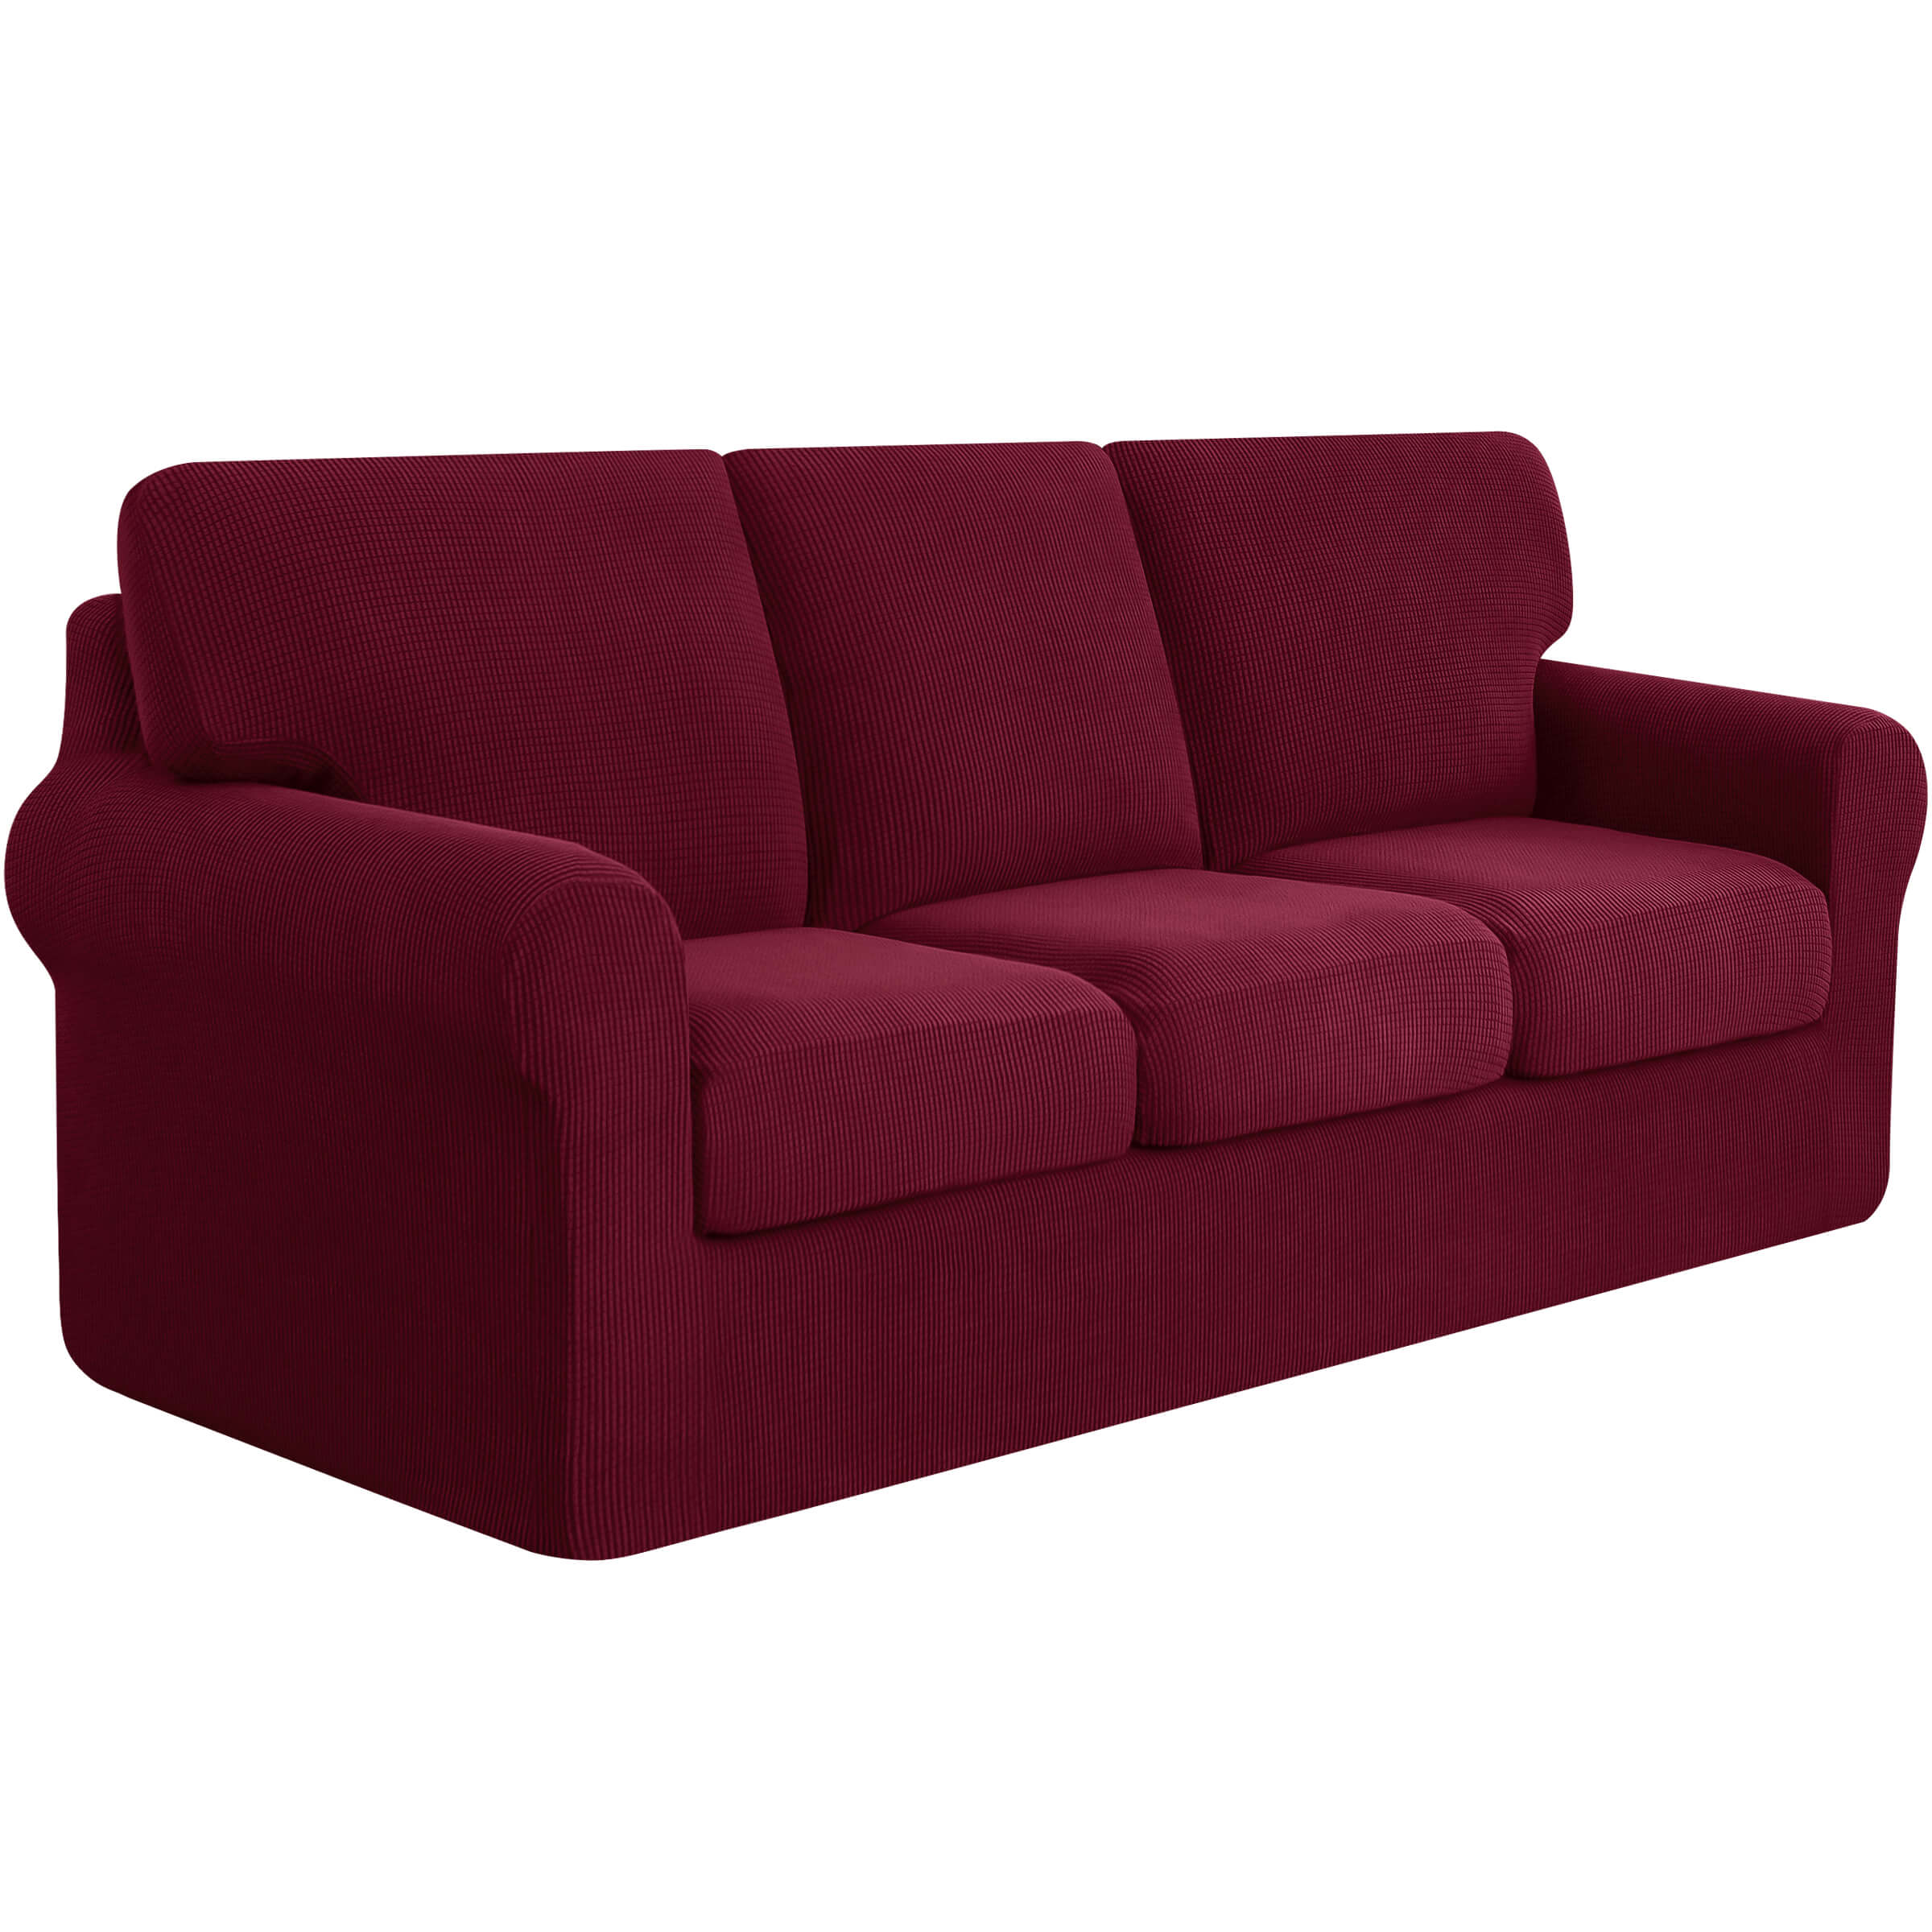 Stretch Sofa Slipcover Sets with Backrest Cushion Cover and Seat Cushion Cover